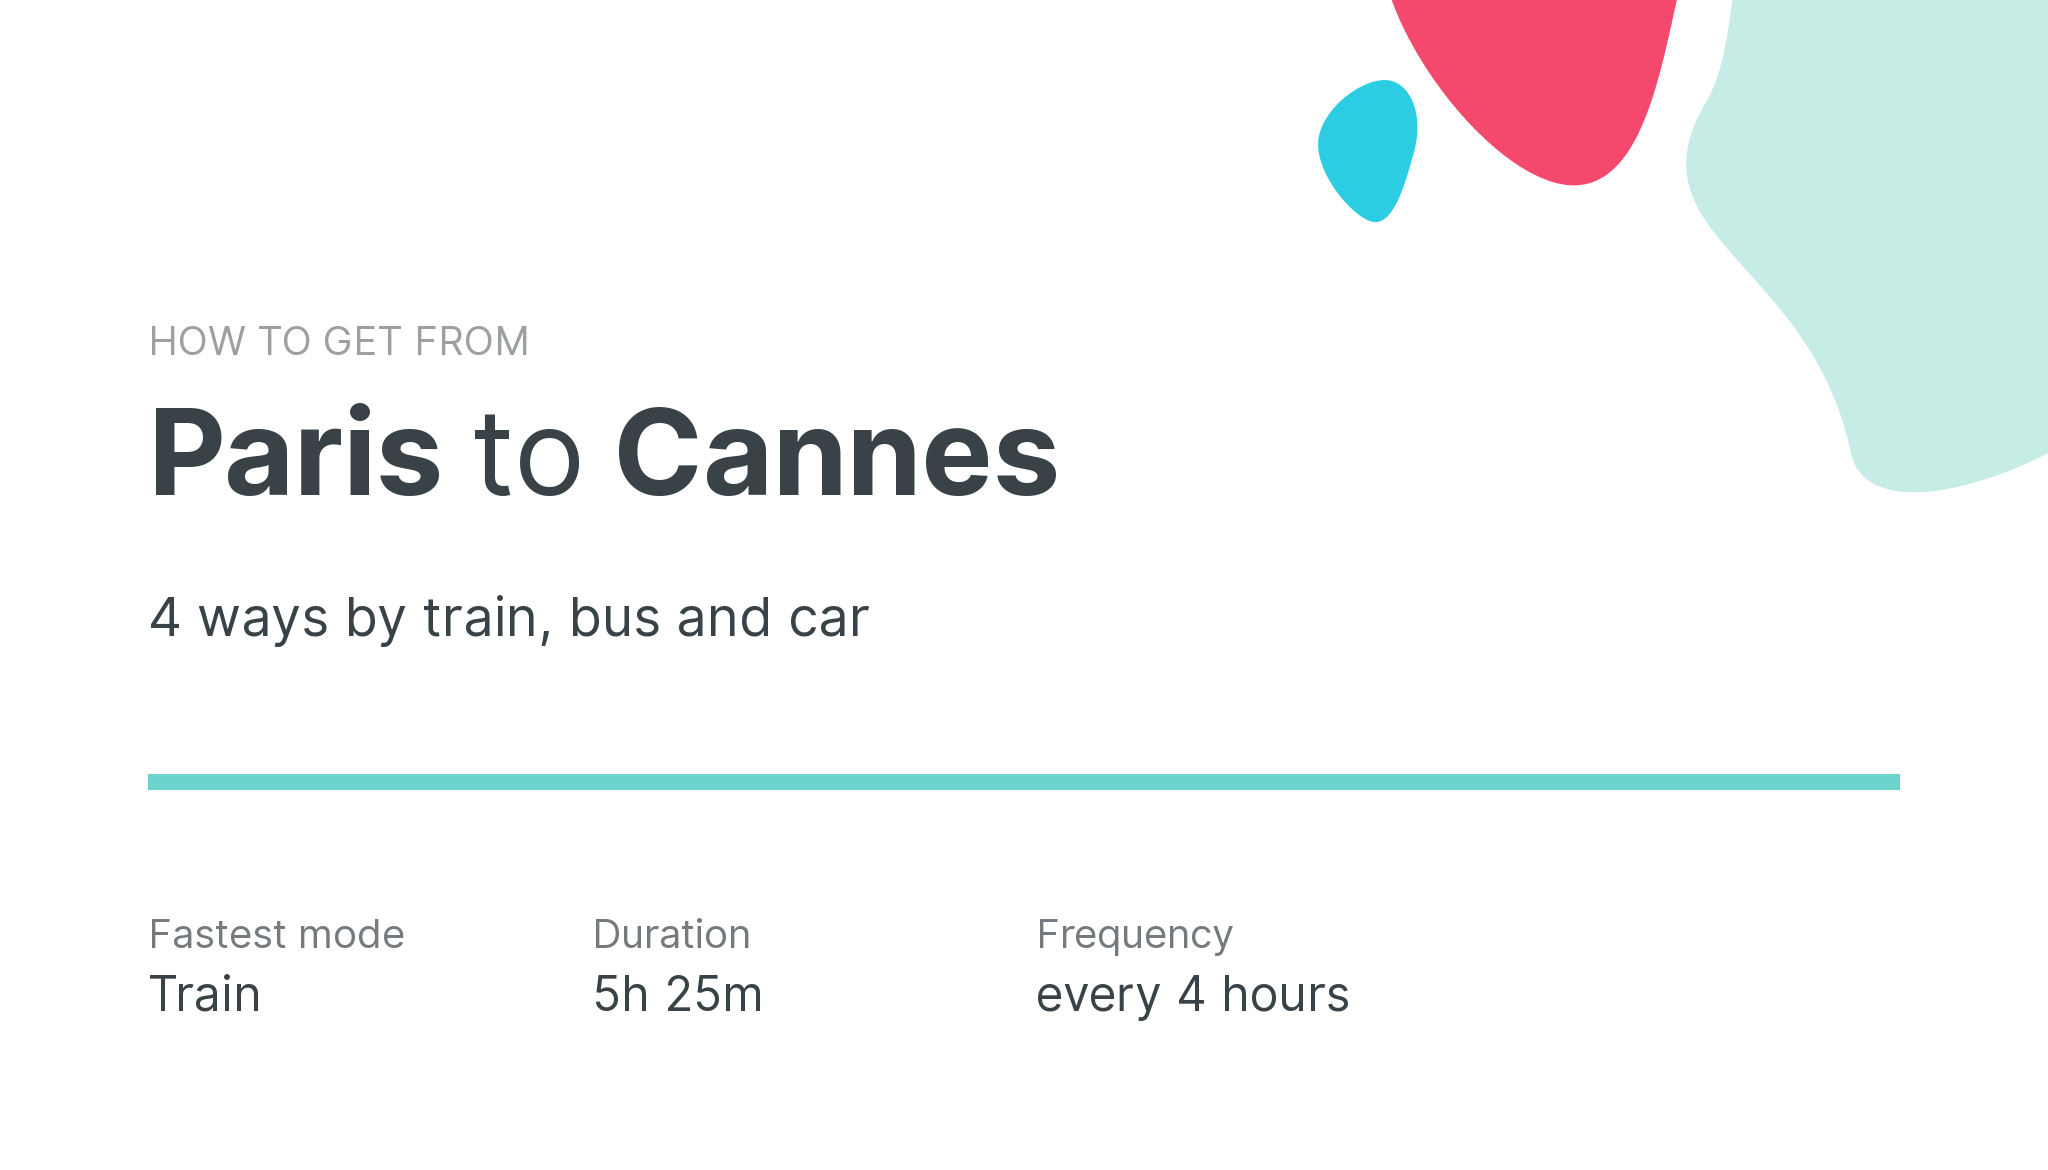 How do I get from Paris to Cannes